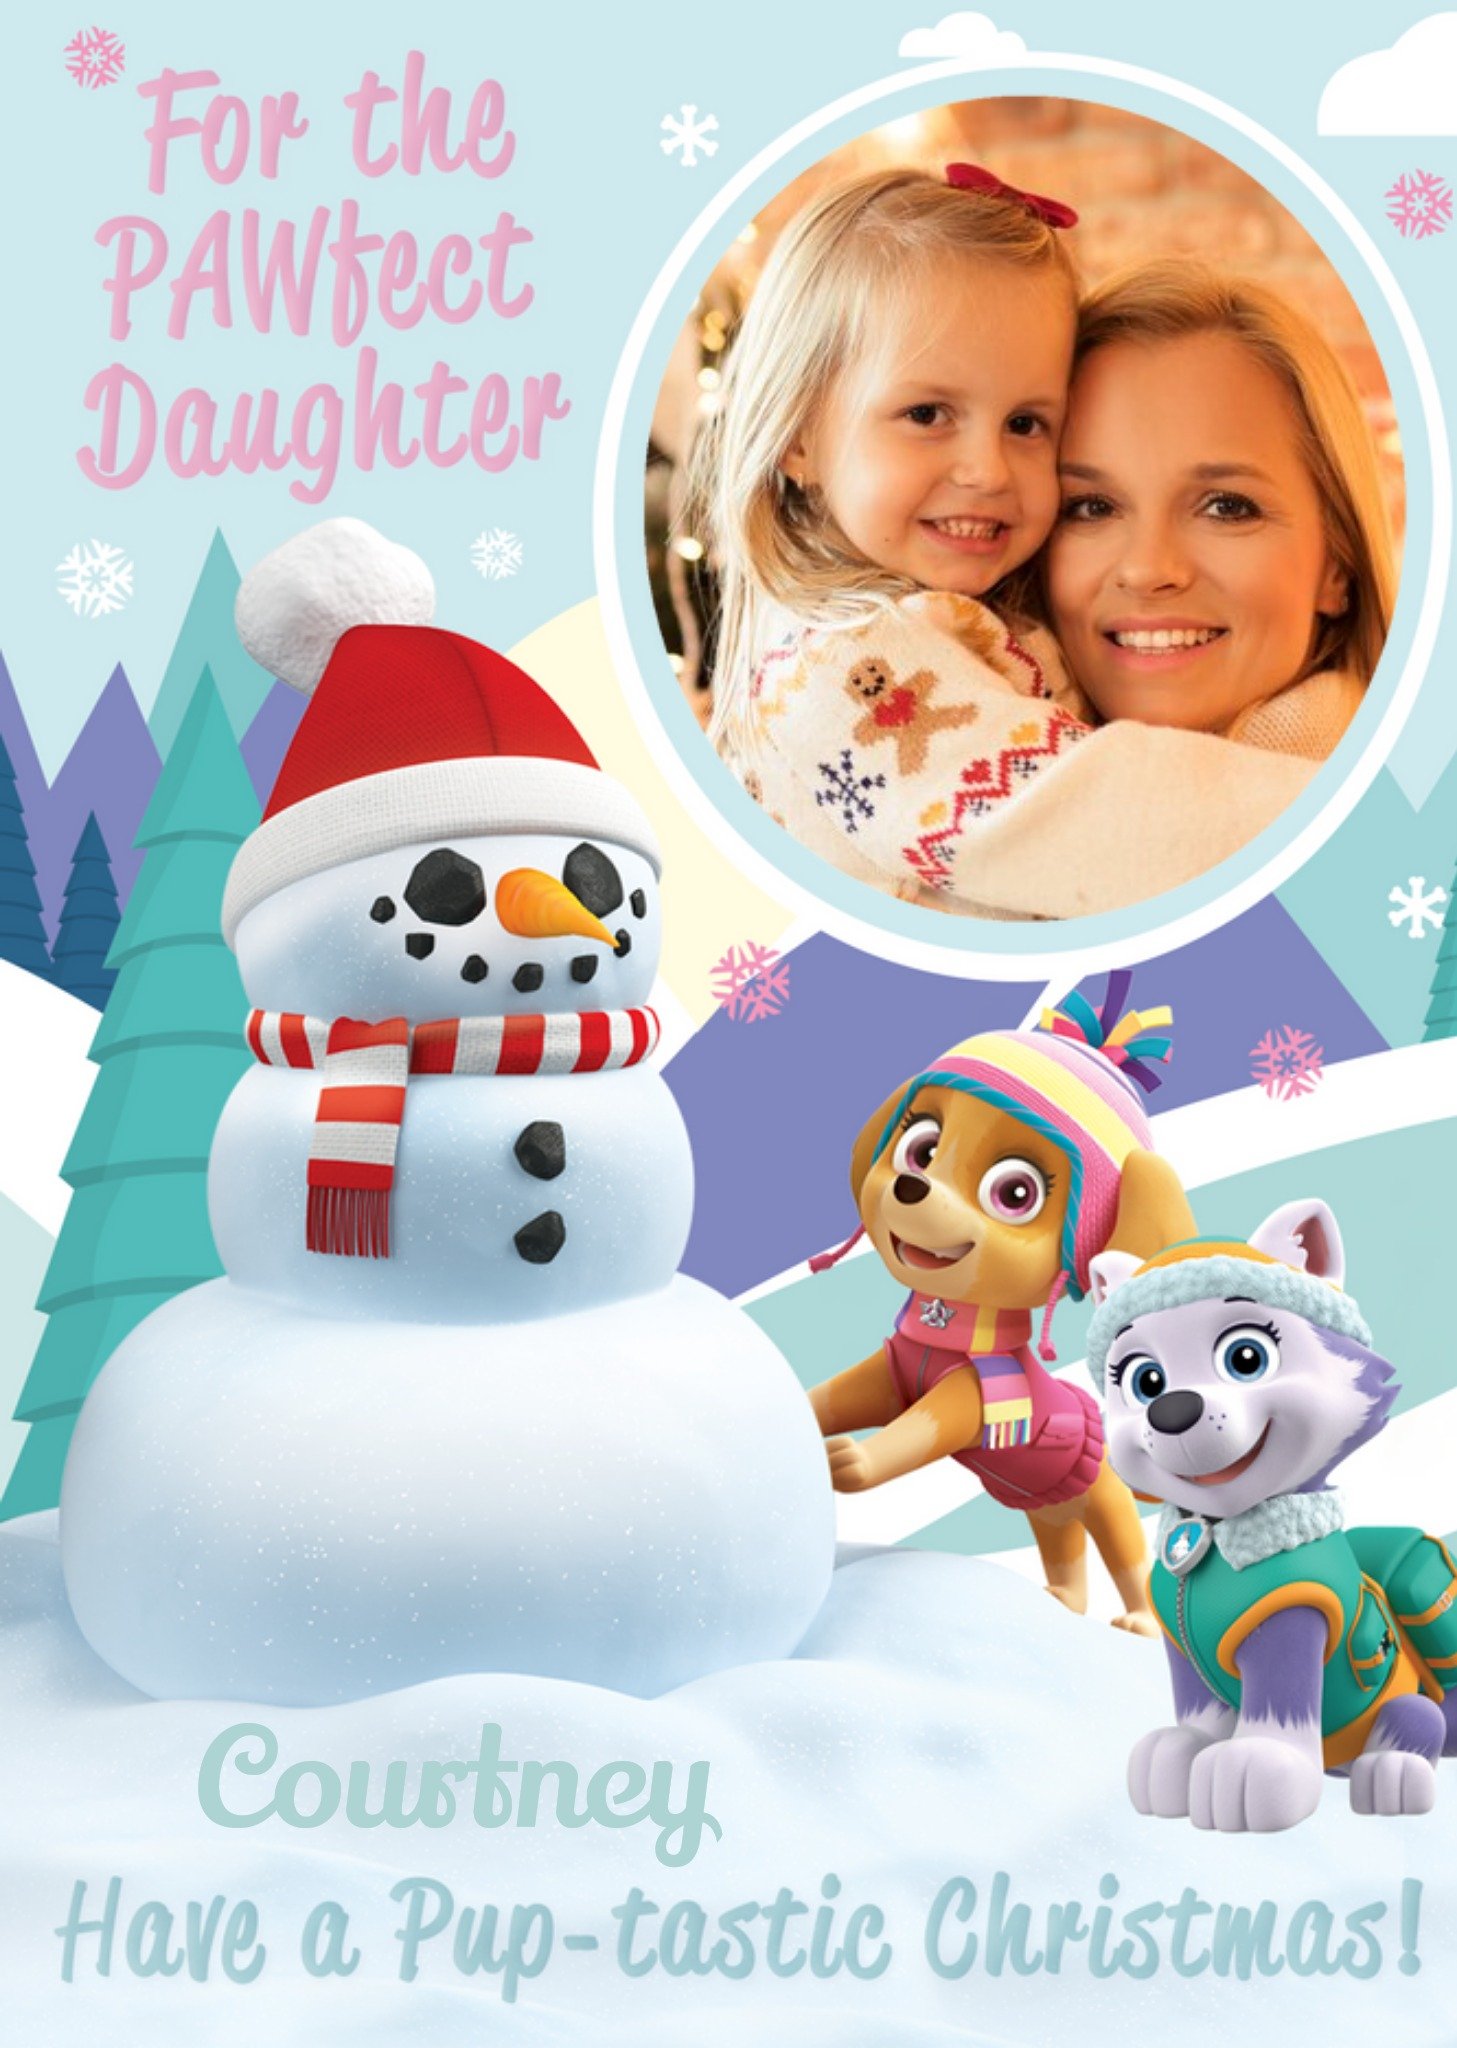 Paw Patrol Colour Me In Activity Photo Upload Girls Christmas Card Ecard